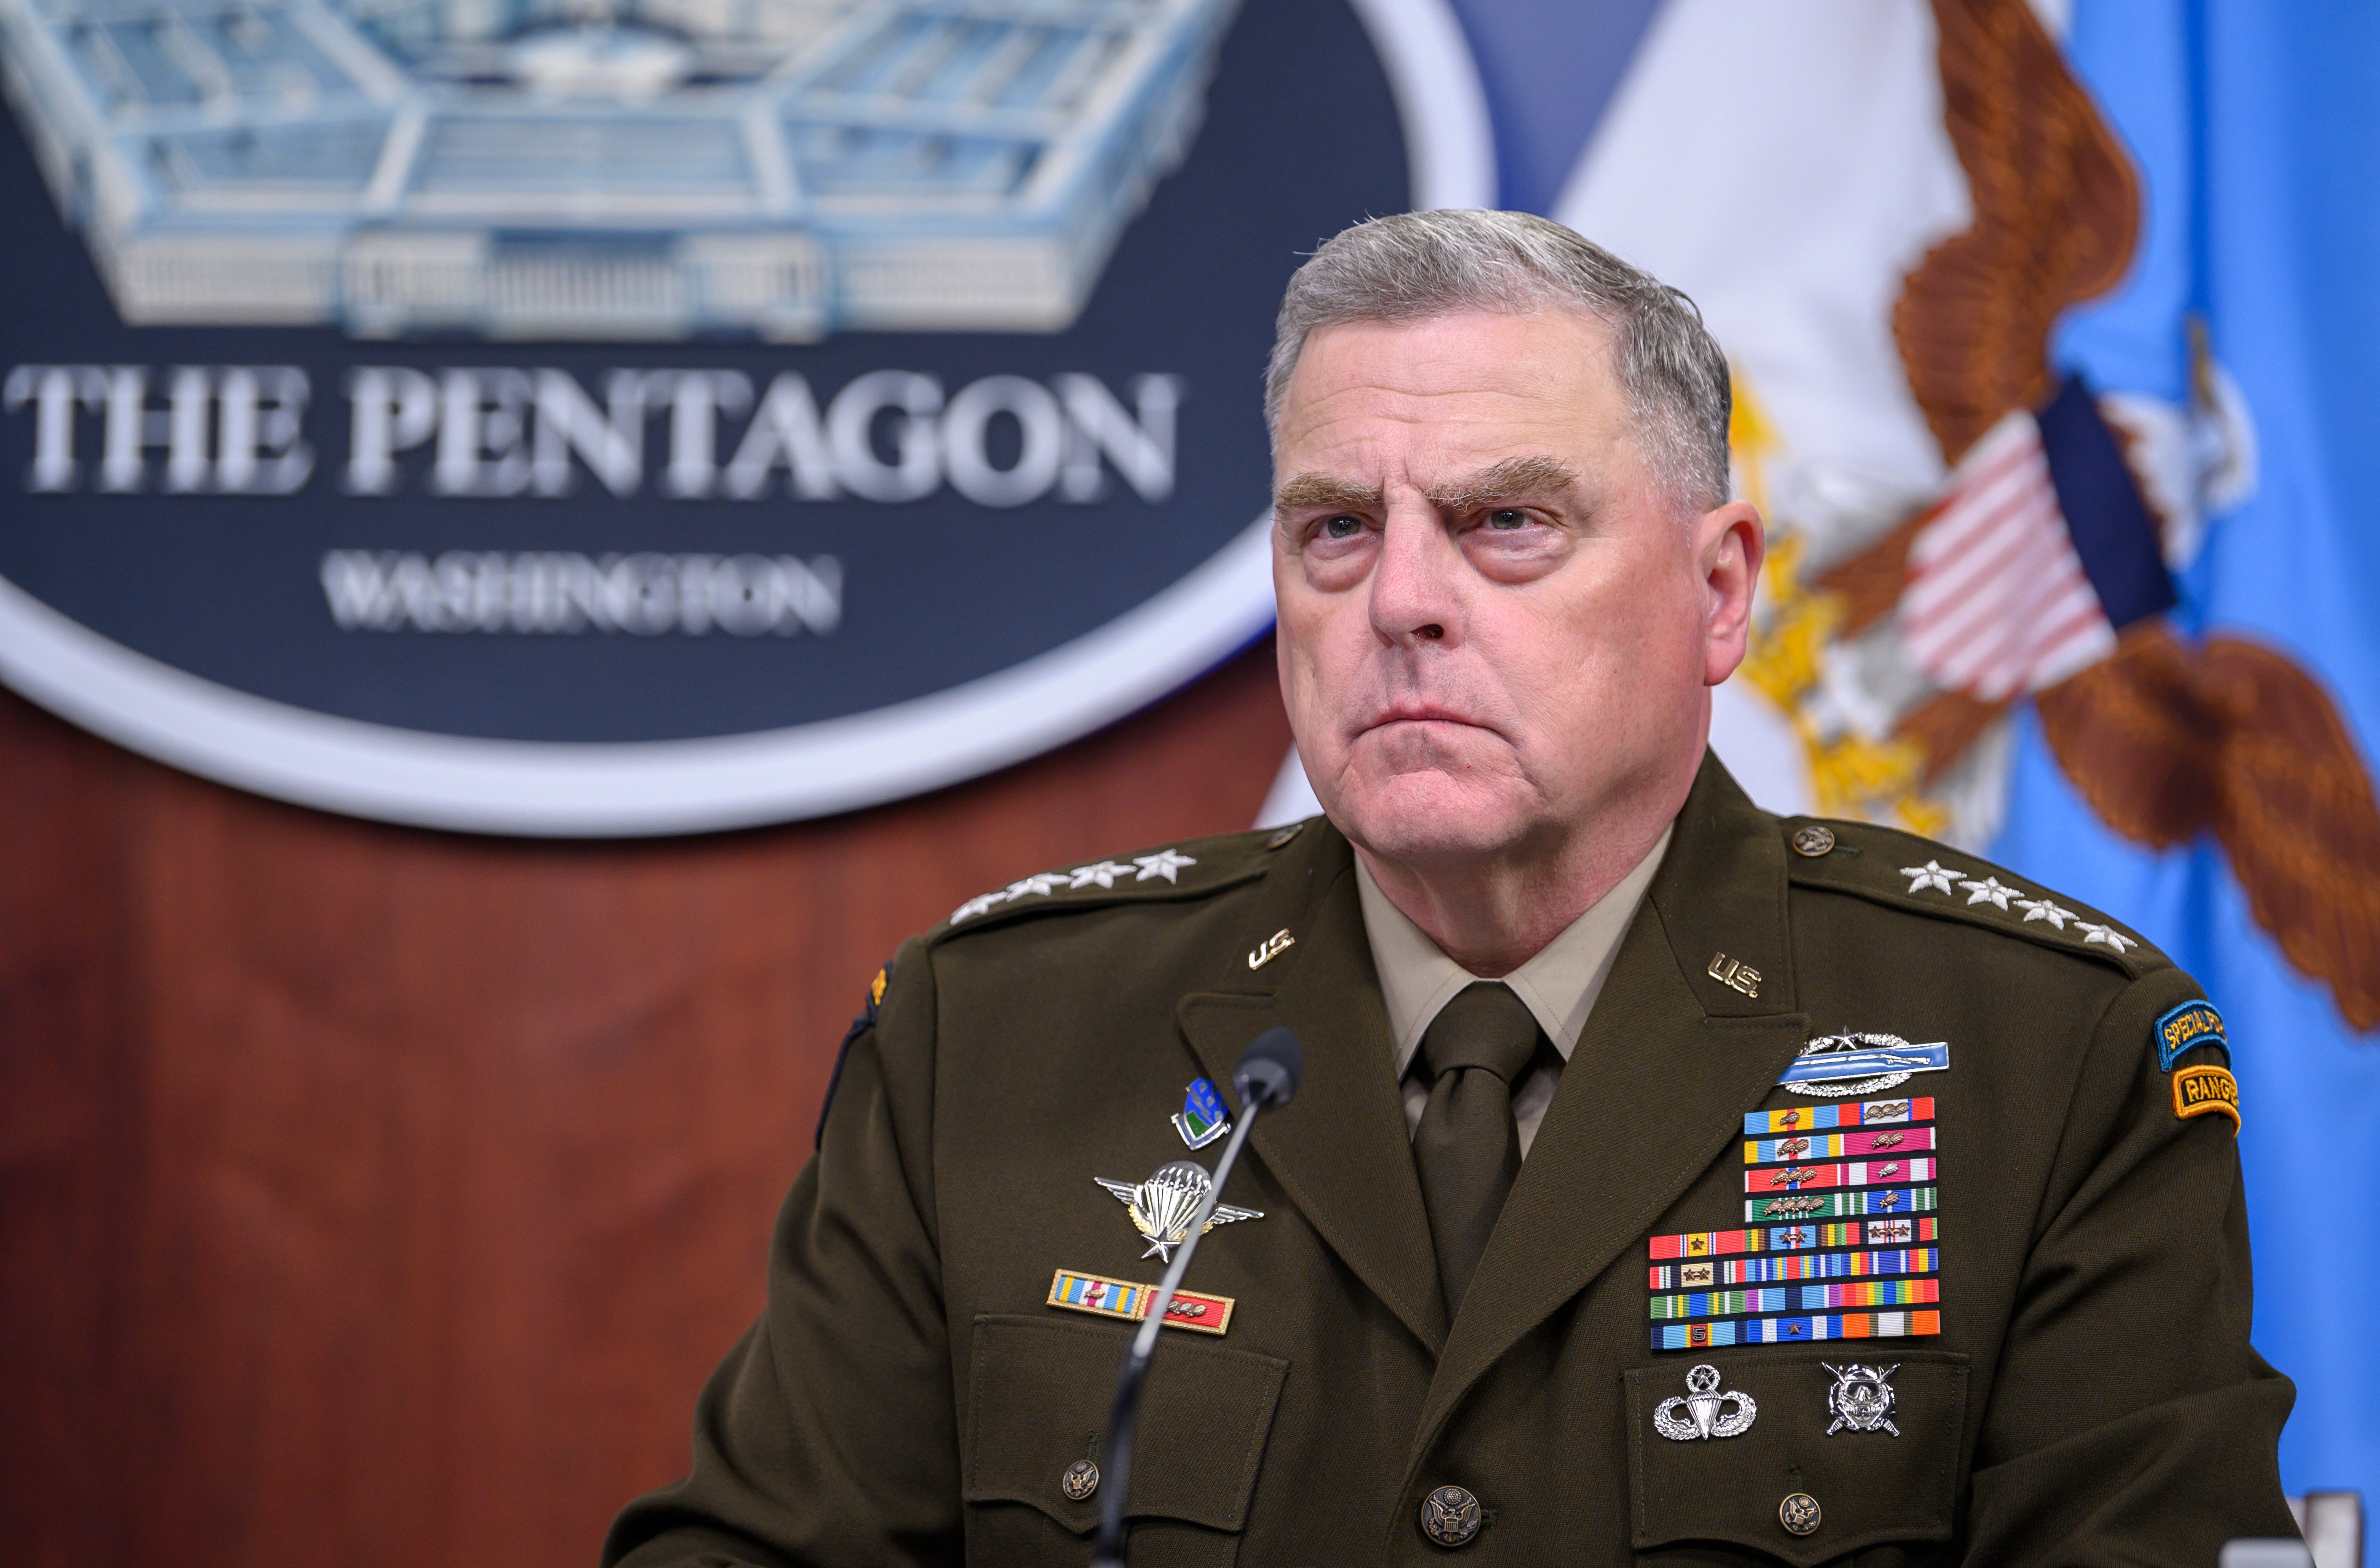 Sample Chairman of joint chiefs of staff apologizes for Remodling Ideas